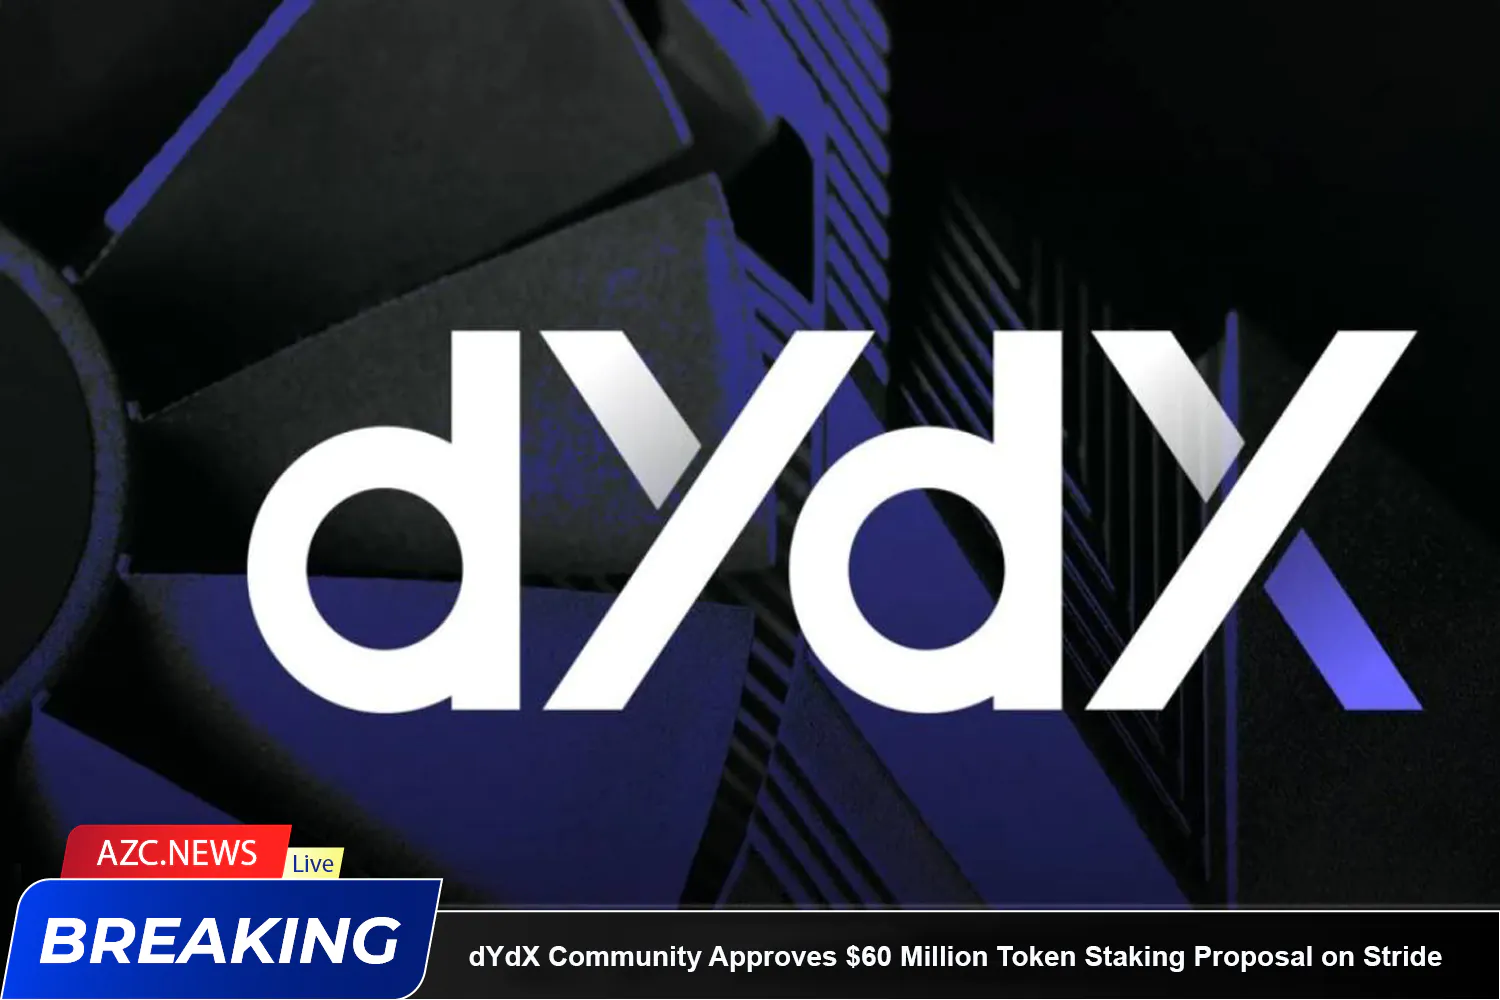 Dydx Community Approves $60 Million Token Staking Proposal On Stride